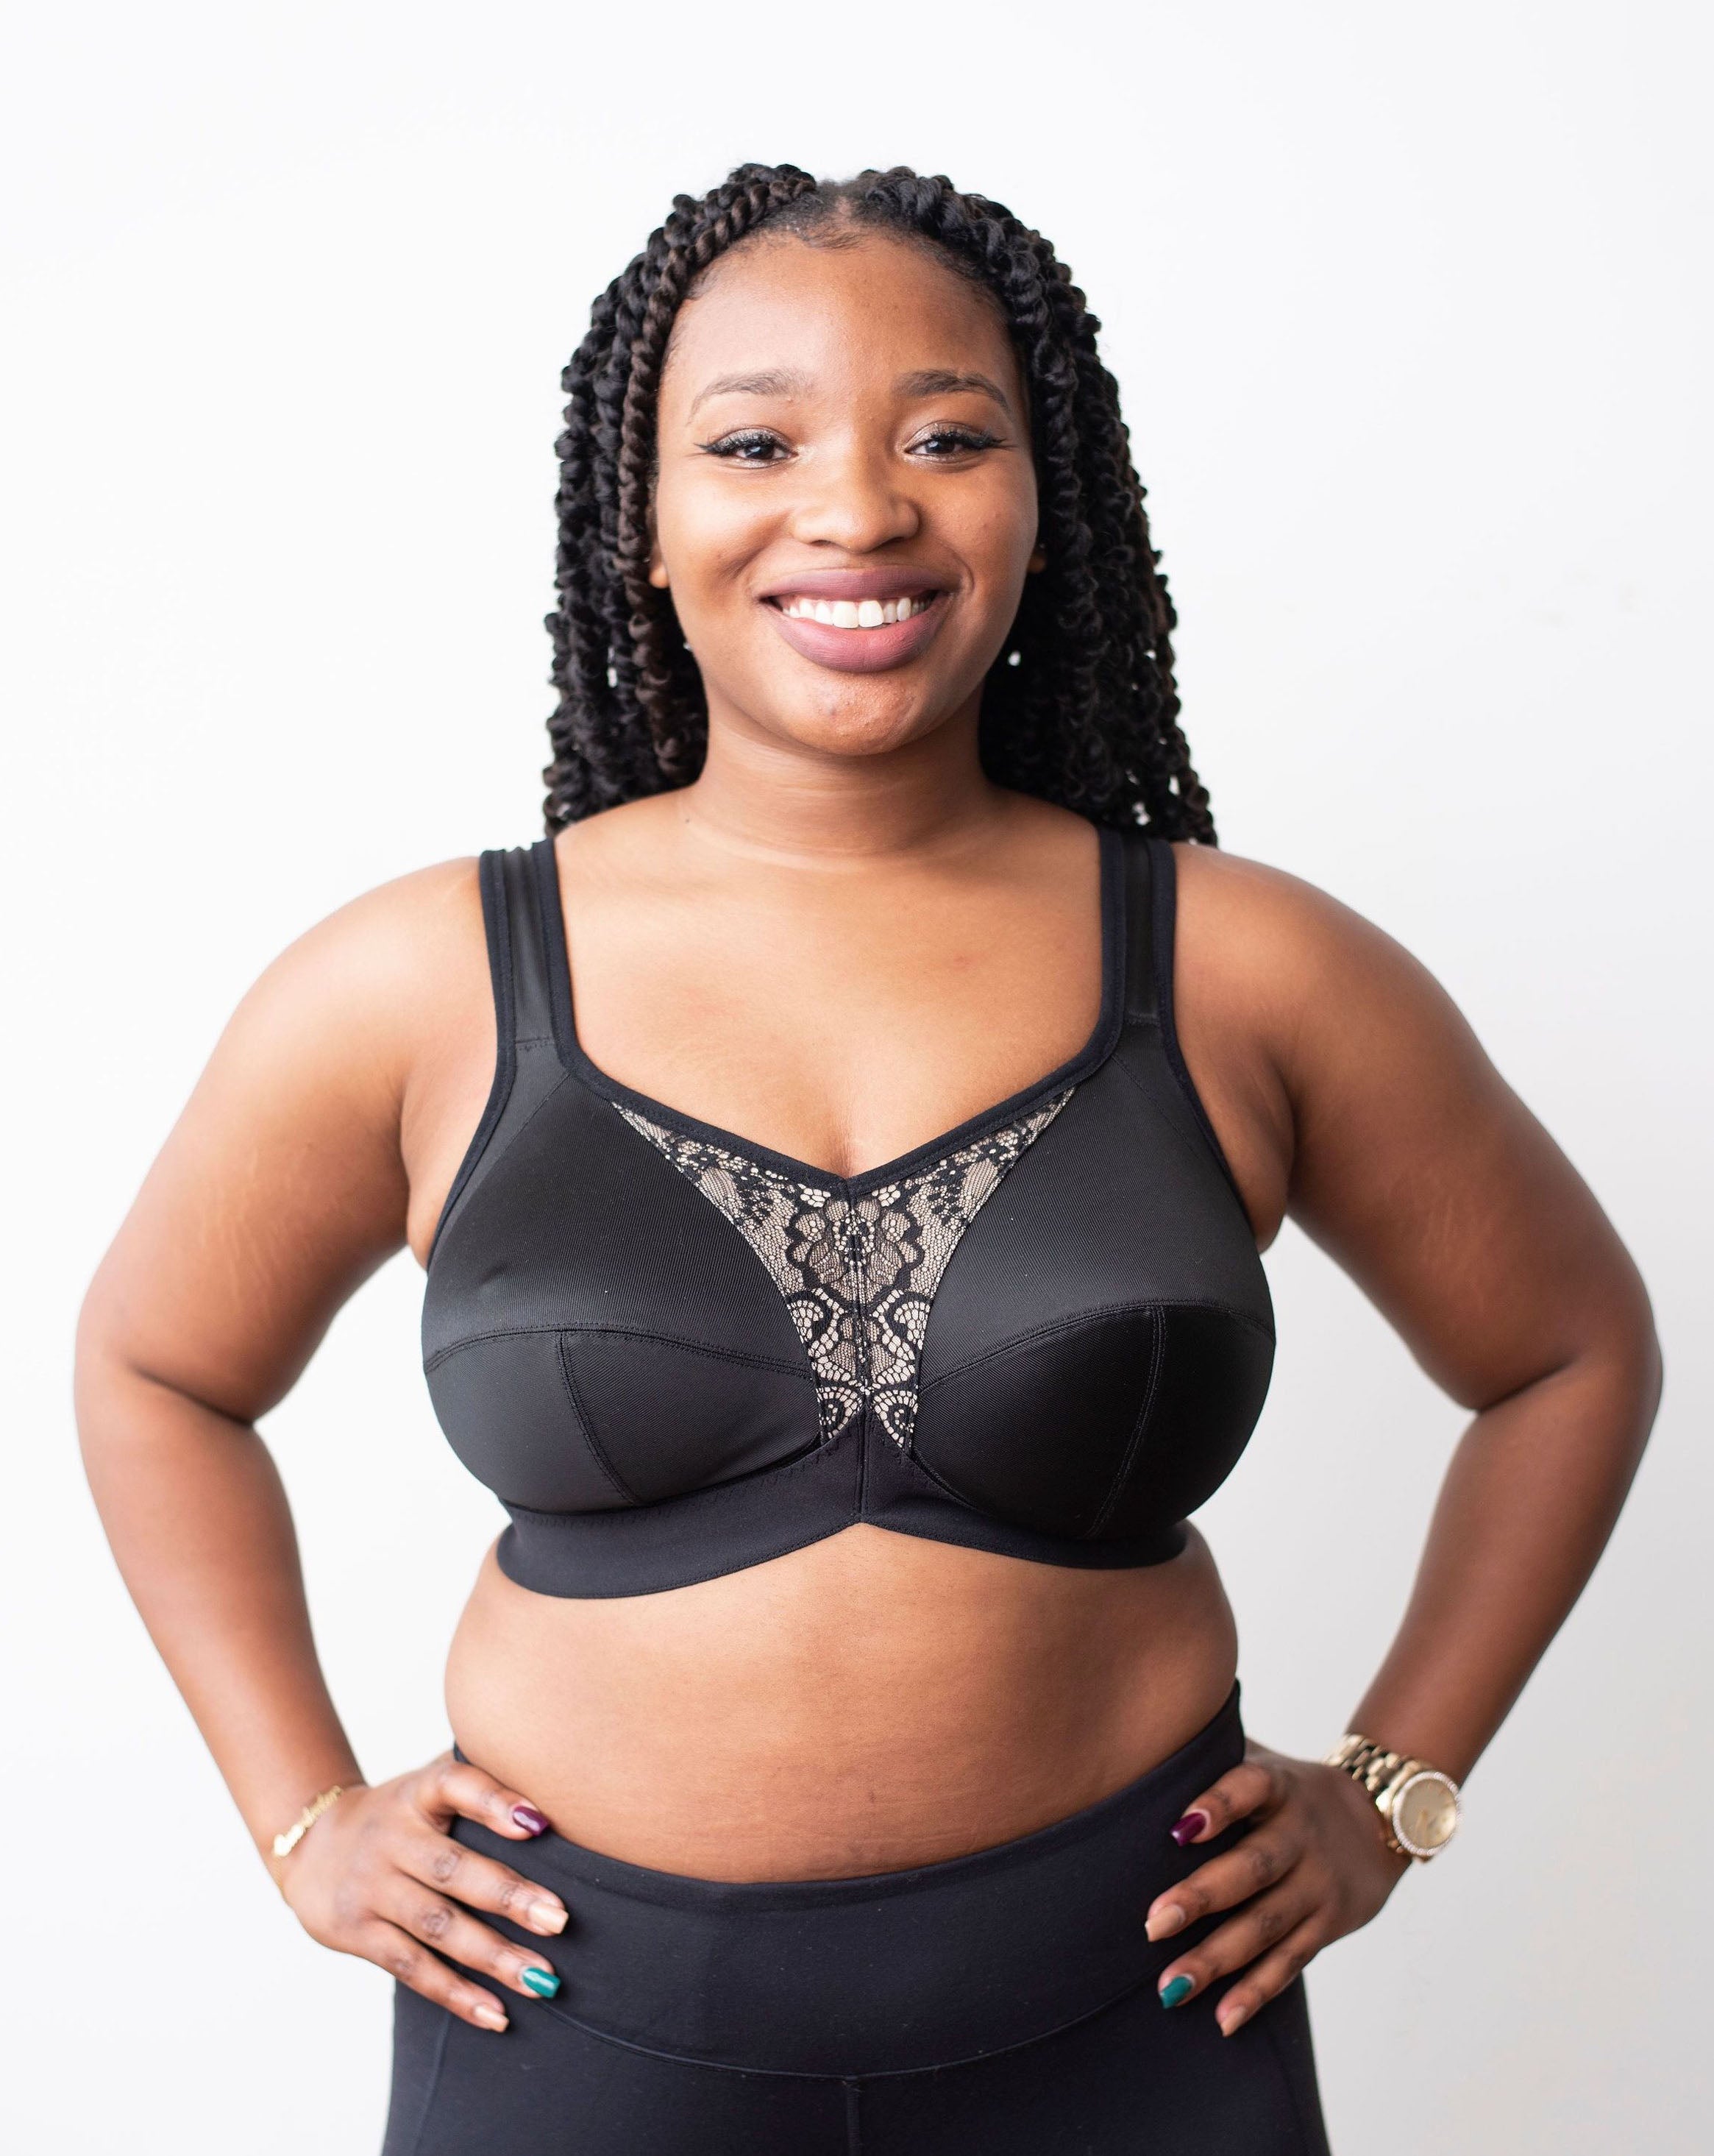 Lia from Rubies Bras, a female with long braided hair, is wearing a black maximum solids full coverage bra and black pants. Front shot on white back drop.